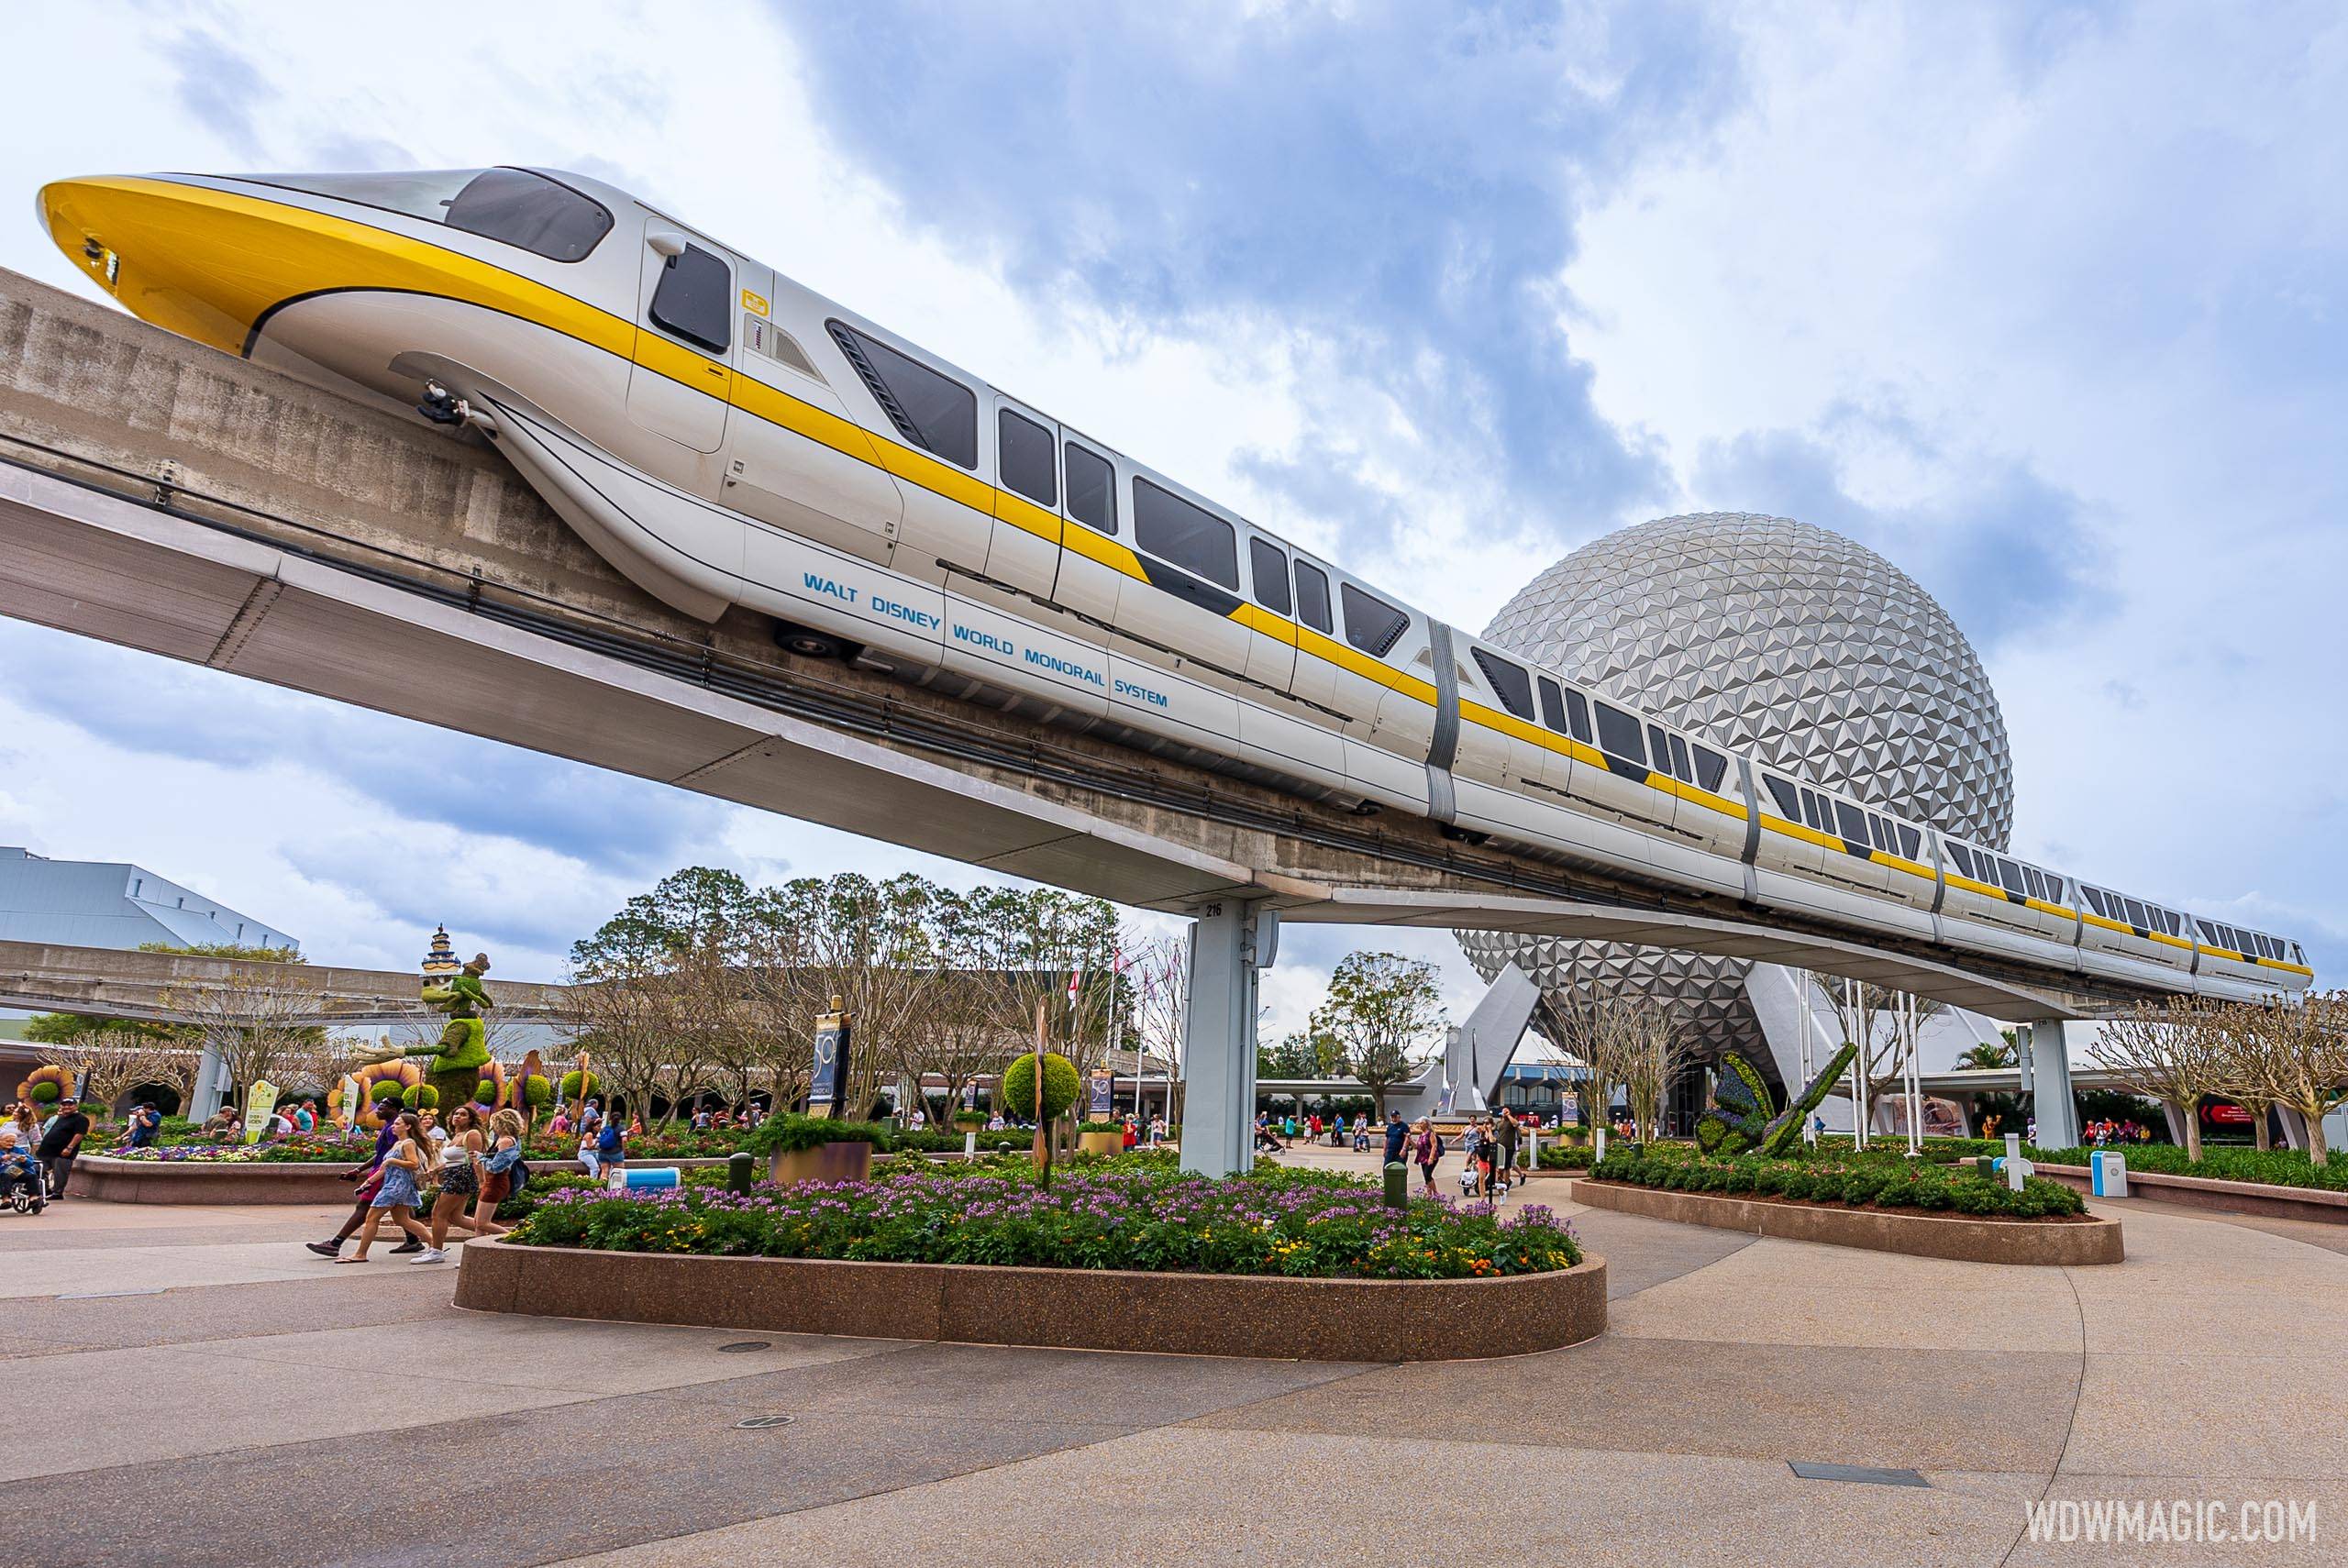 Florida Governor Ron DeSantis is now moving to target Disney's monorail system